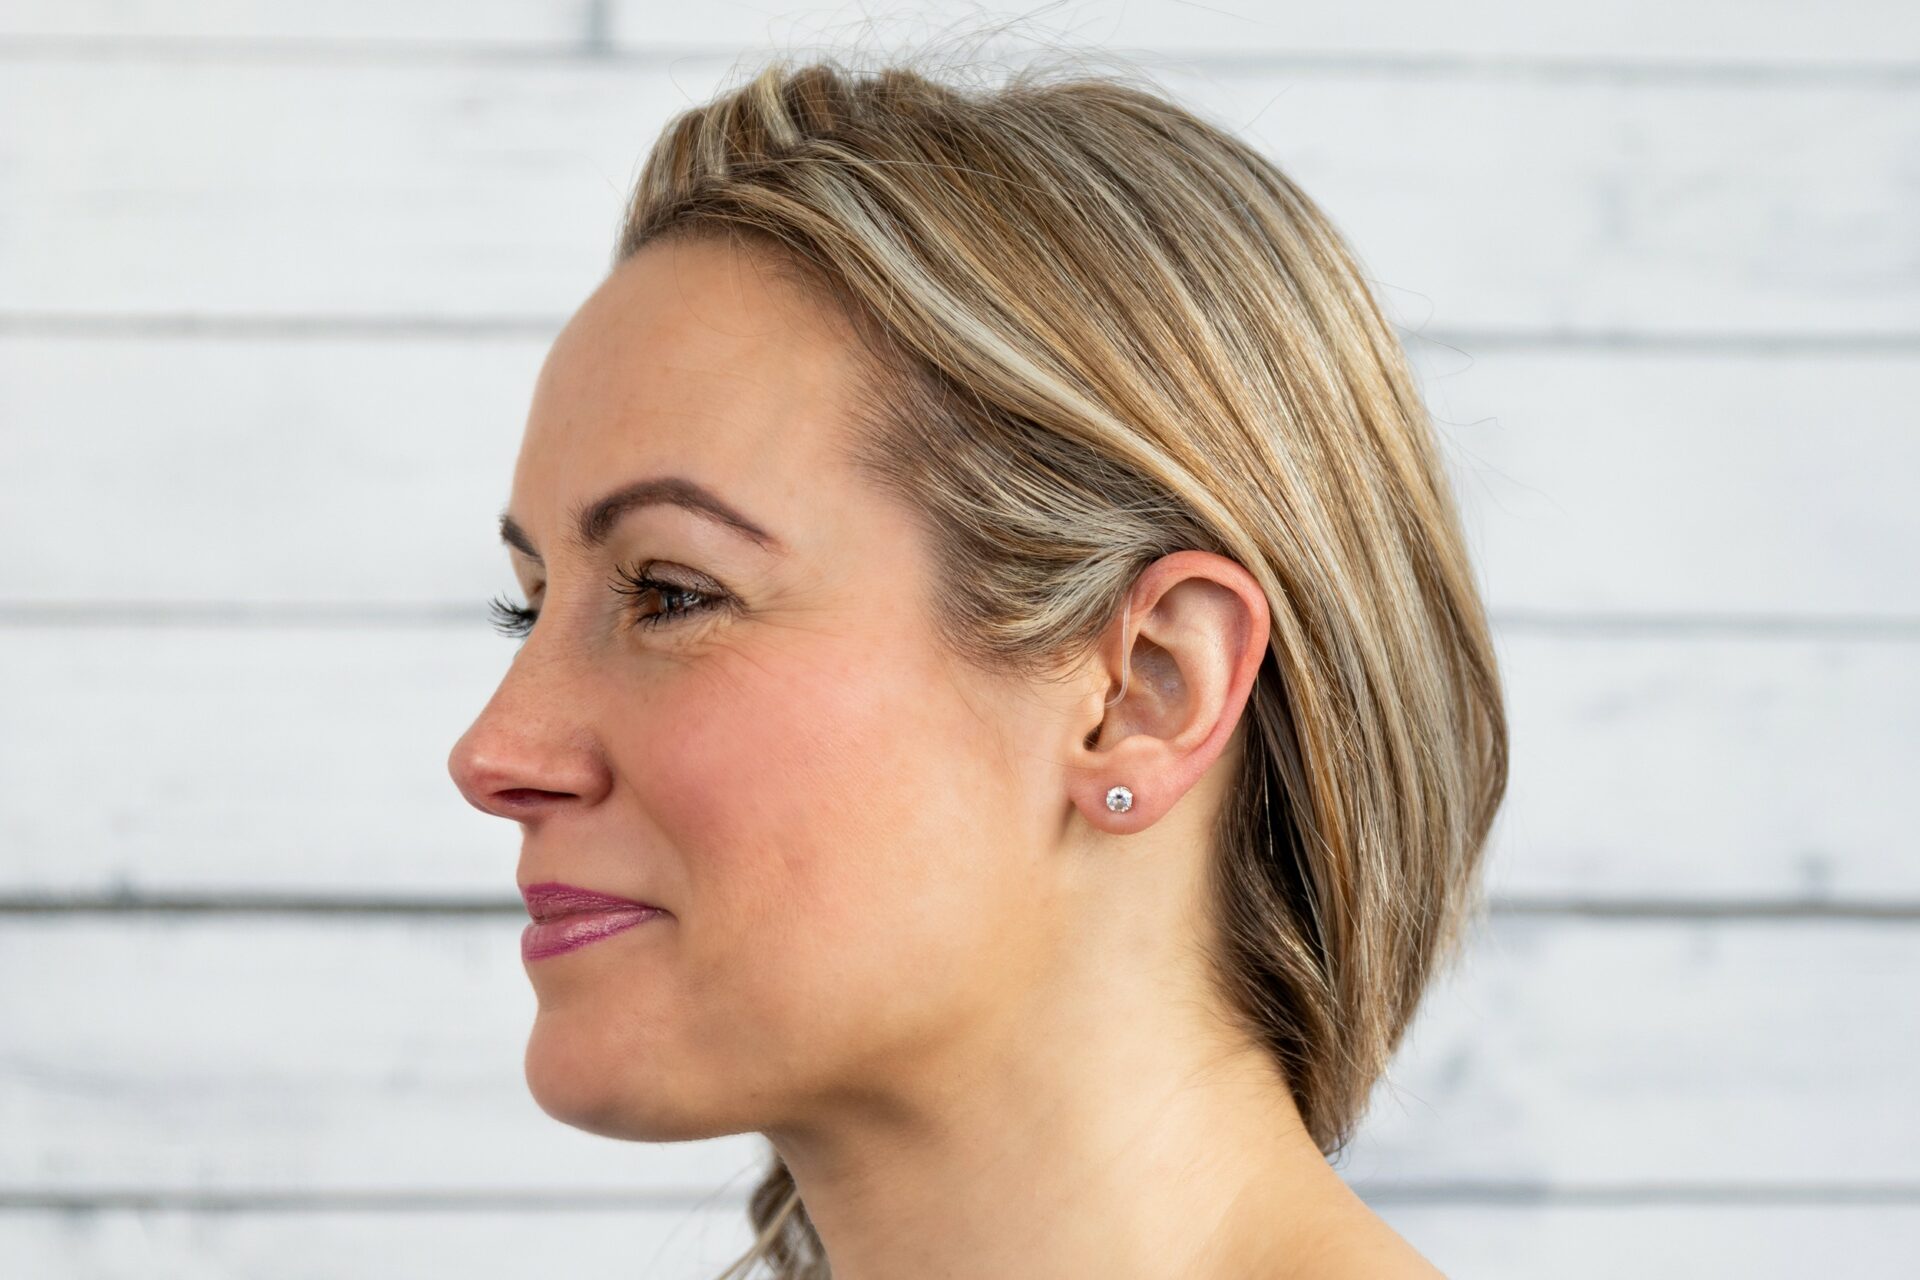 Woman H1 blonde side view - wearing a hearing aid